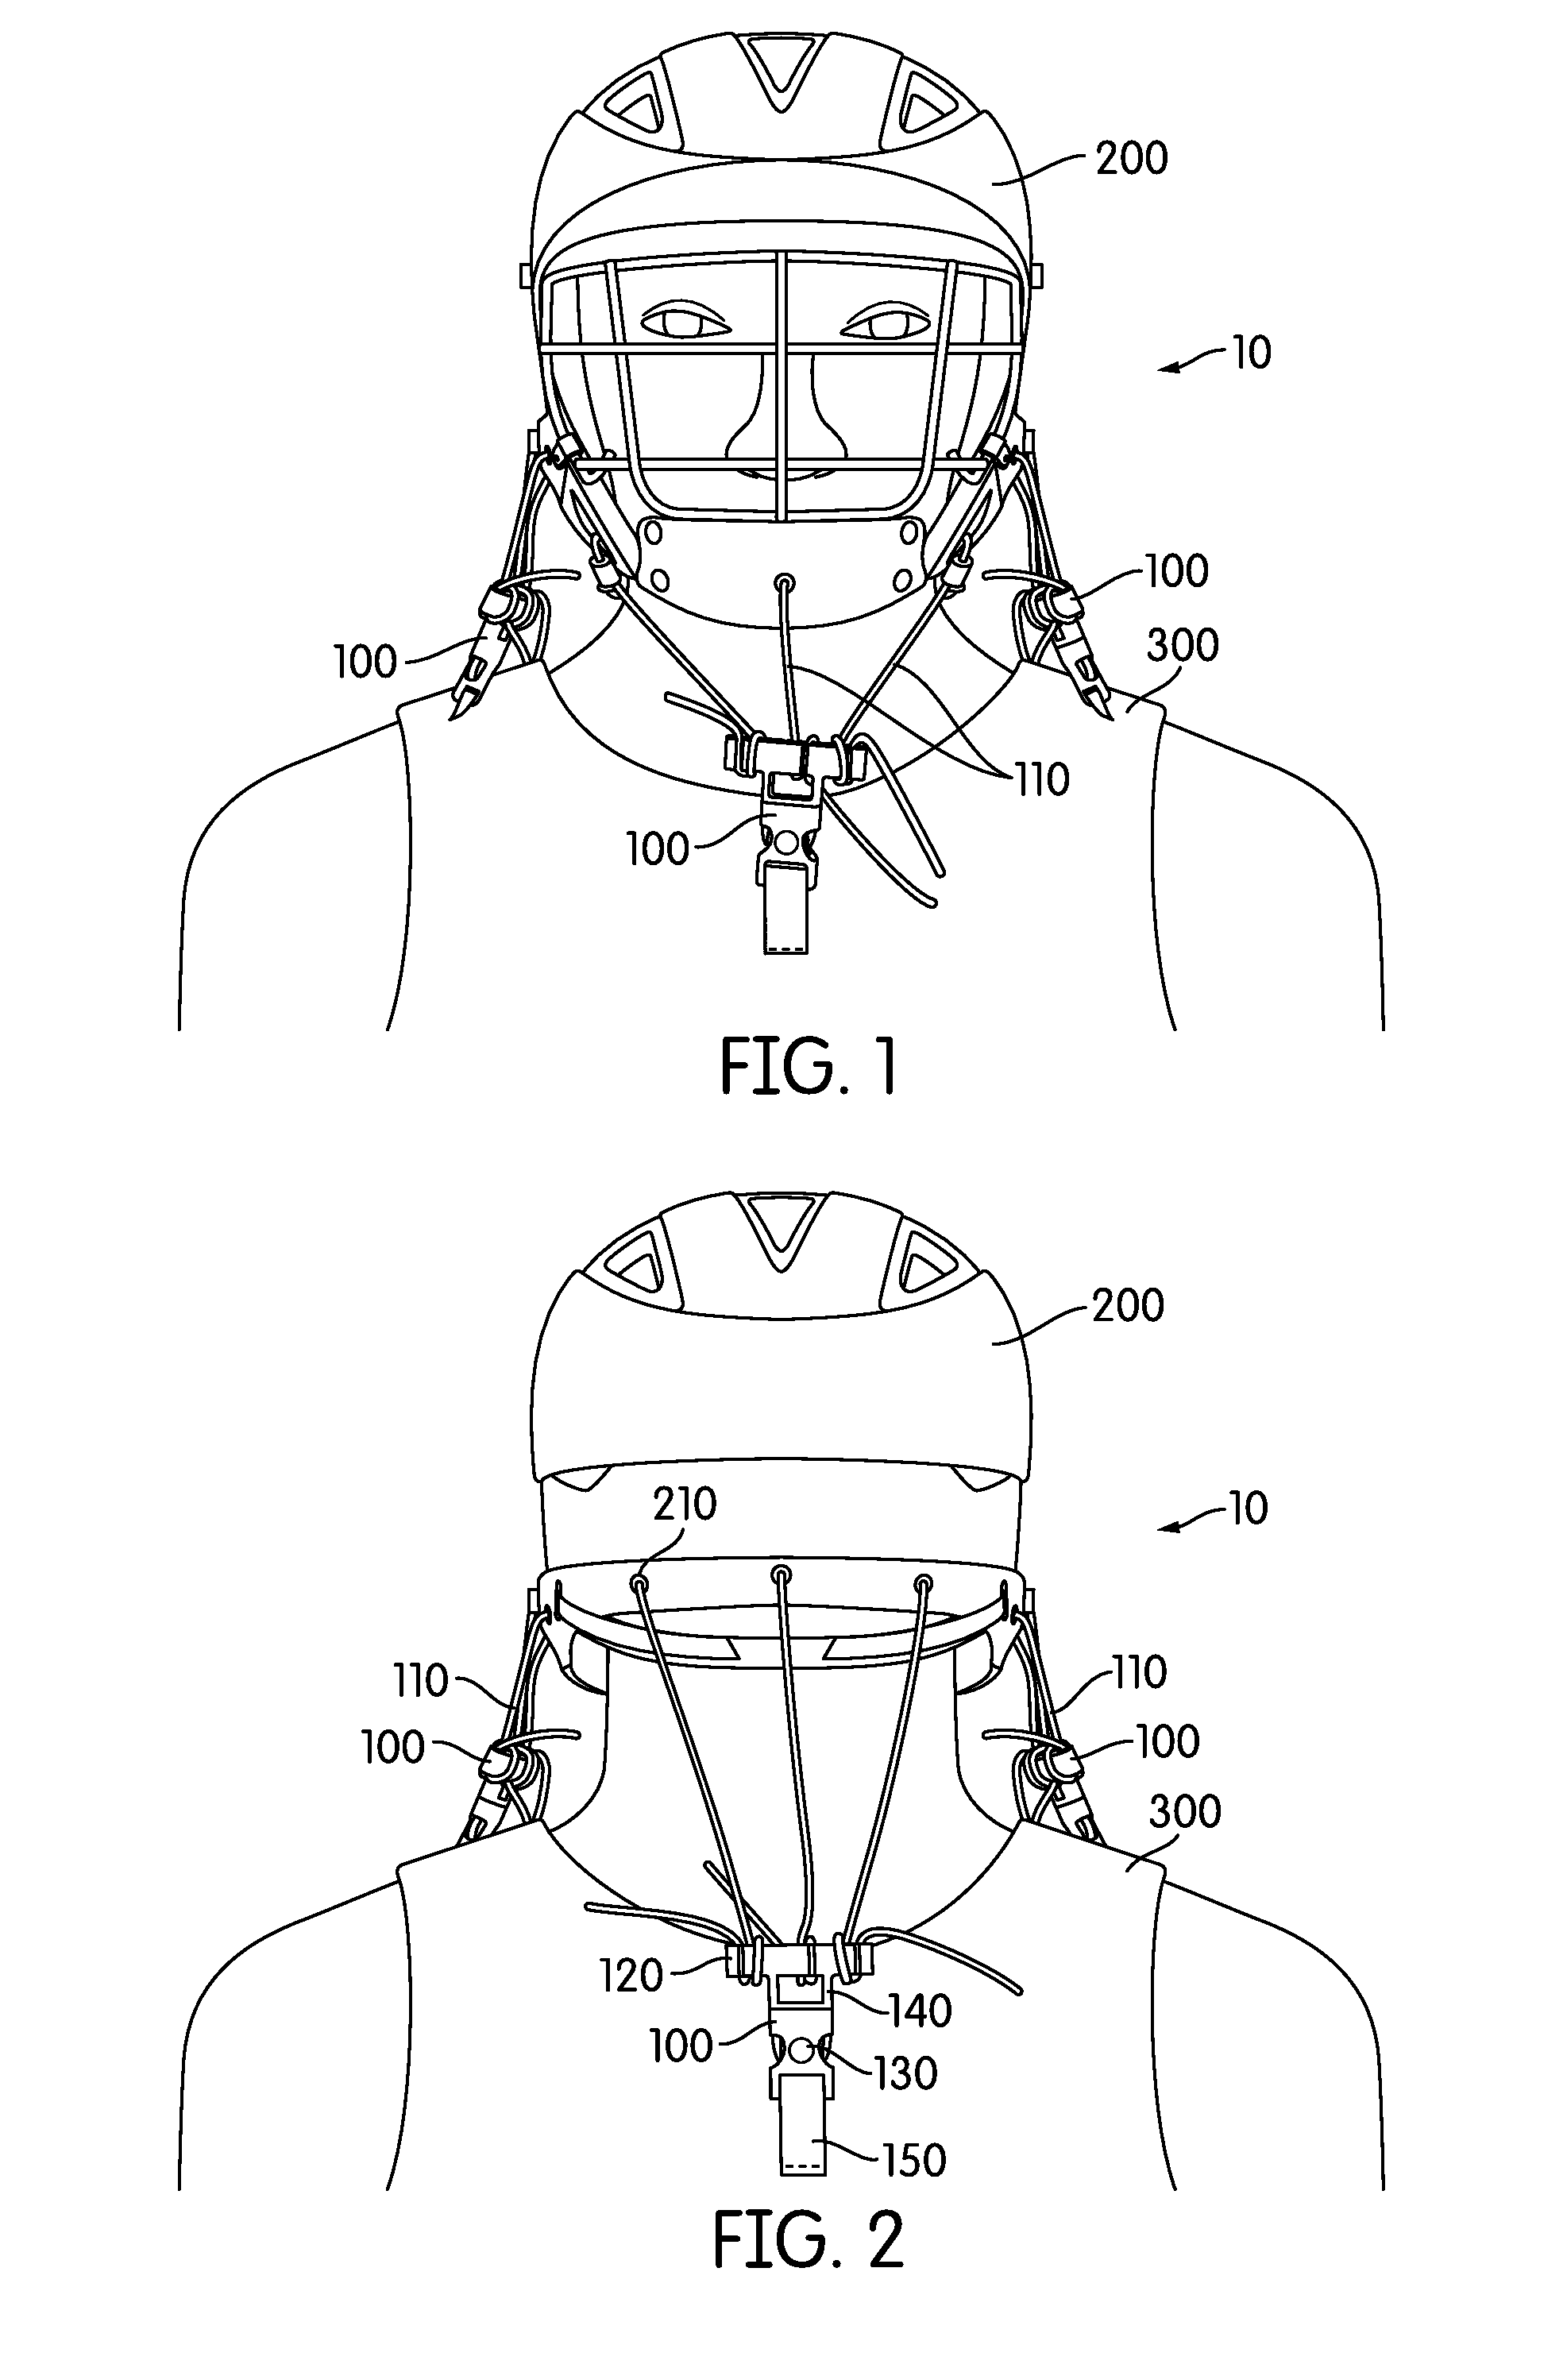 Apparatus for preventing neck injury, spinal cord injury and concussion